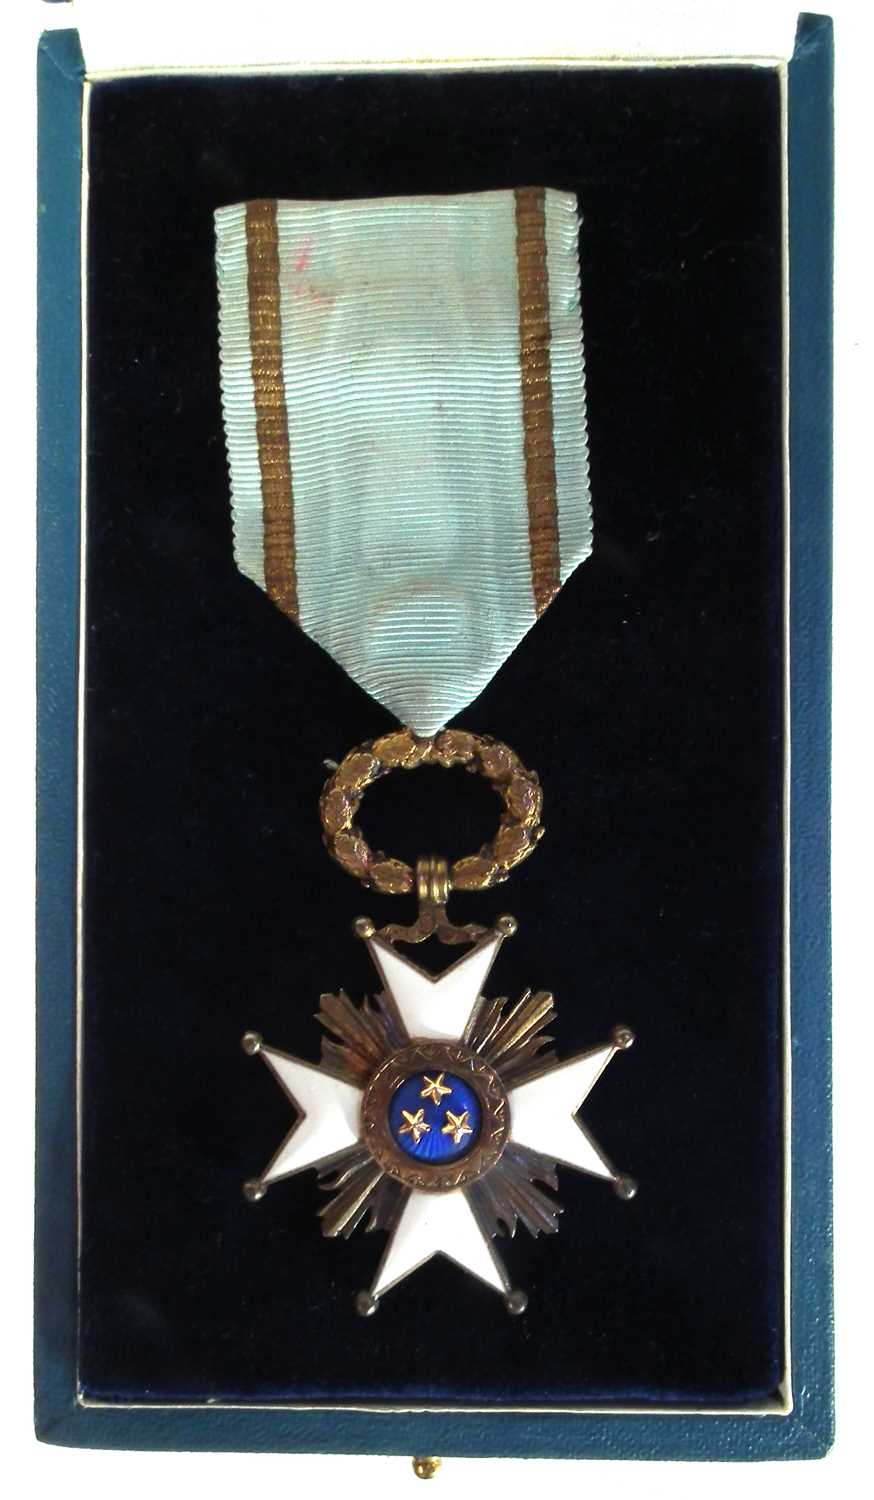 Lot 113 - Order of the three stars medal